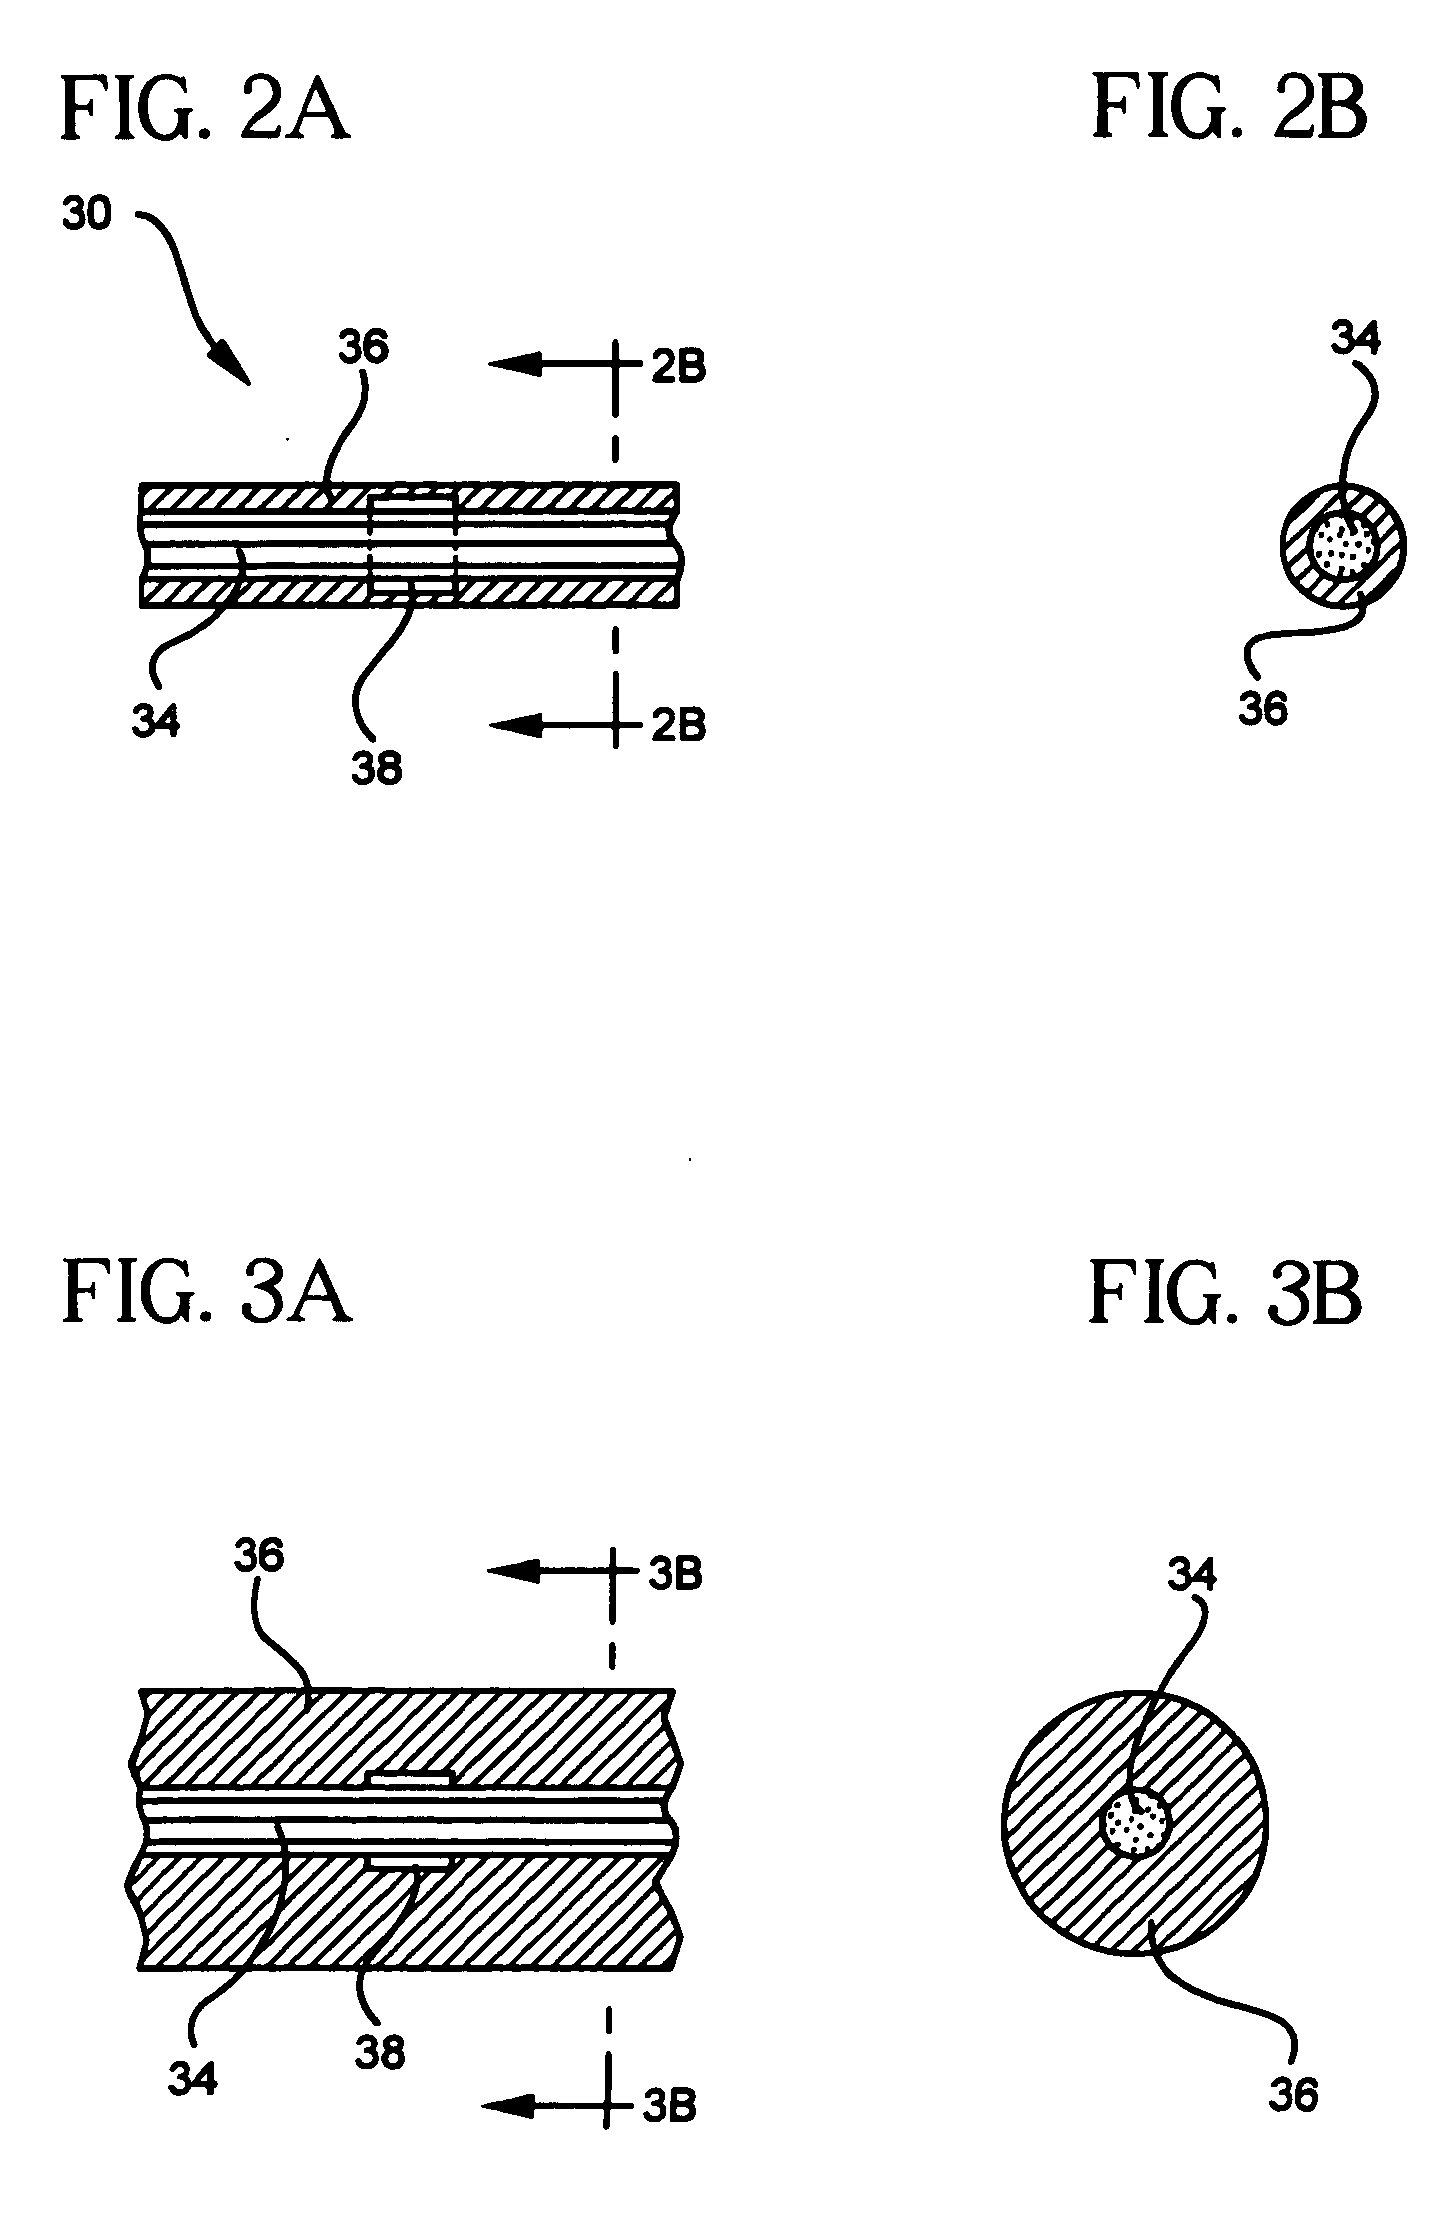 Methods of, and materials for, treating vascular defects with magnetically controllable hydrogels